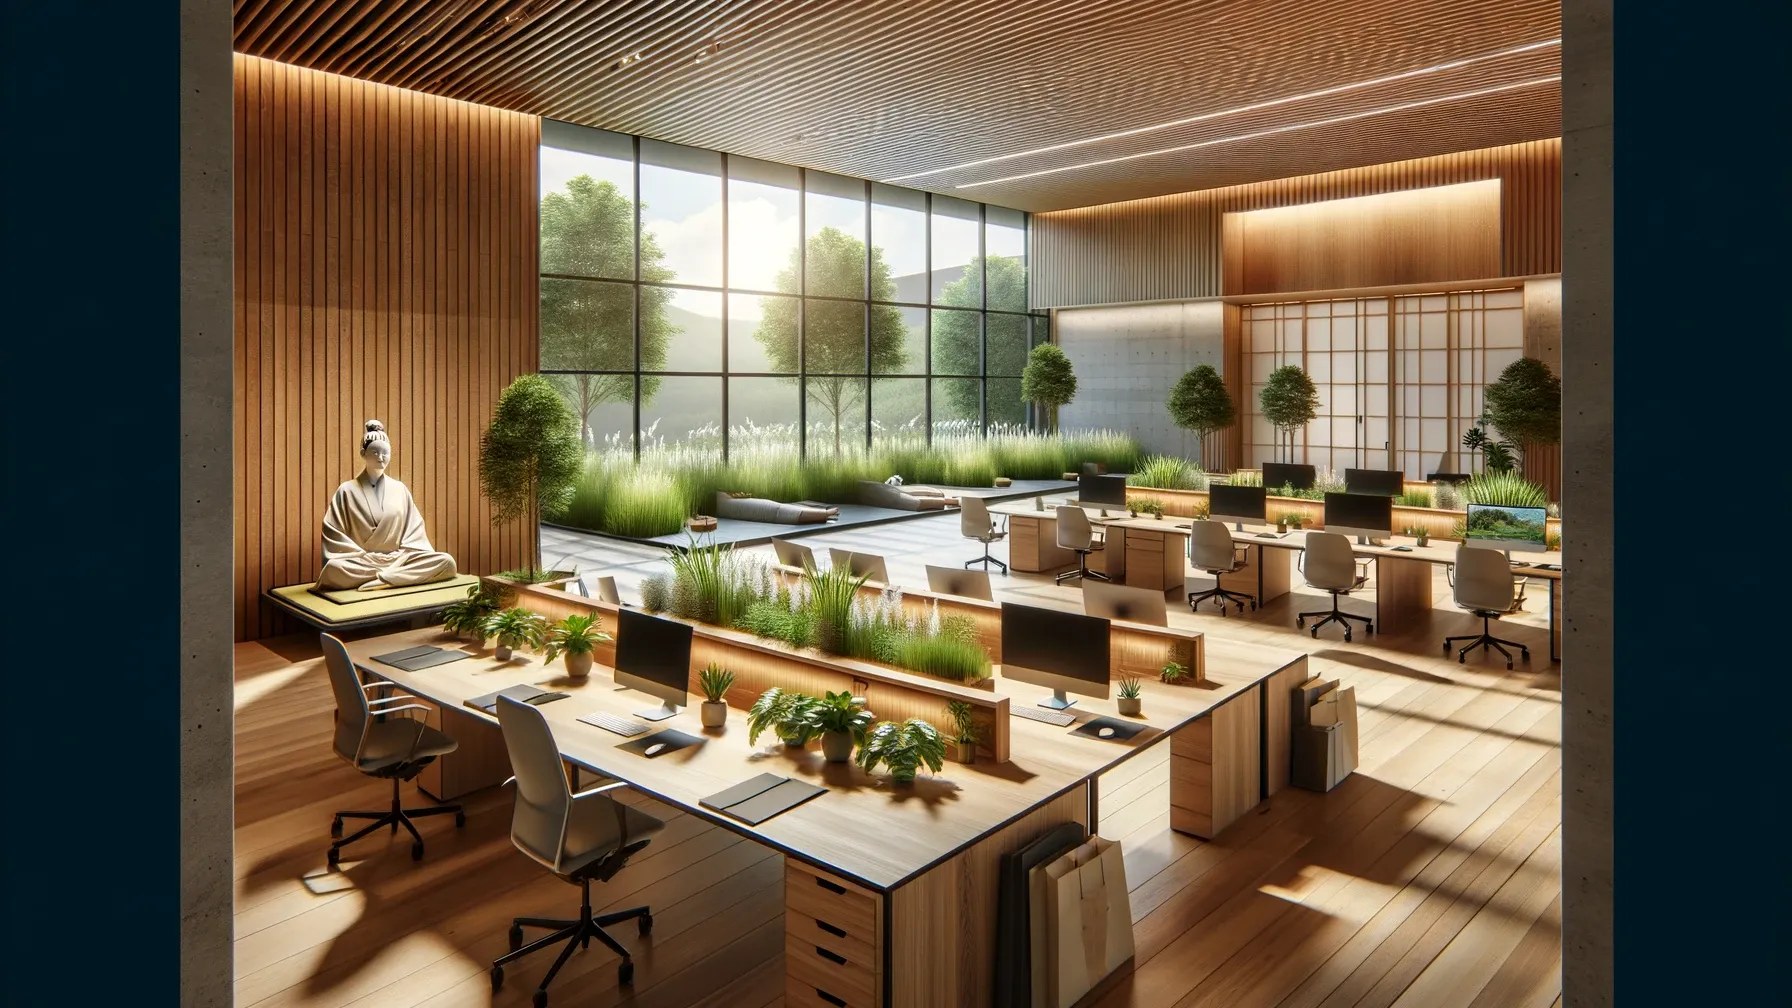 A modern office space designed with Zen principles